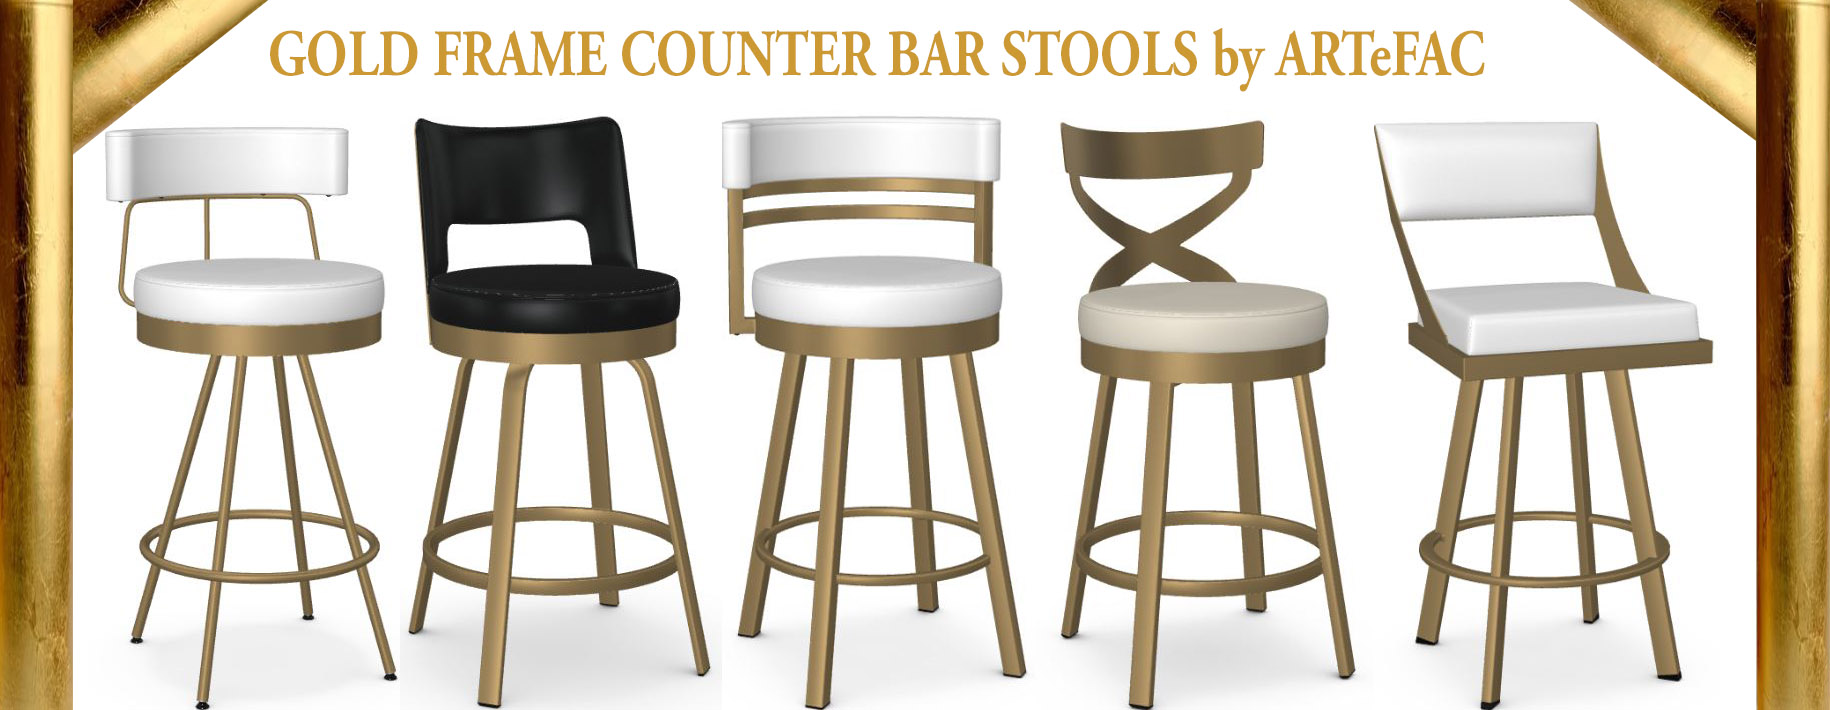 Chairs Bar Stools In Usa Artefac, Metal Bar Stools Made In Usa